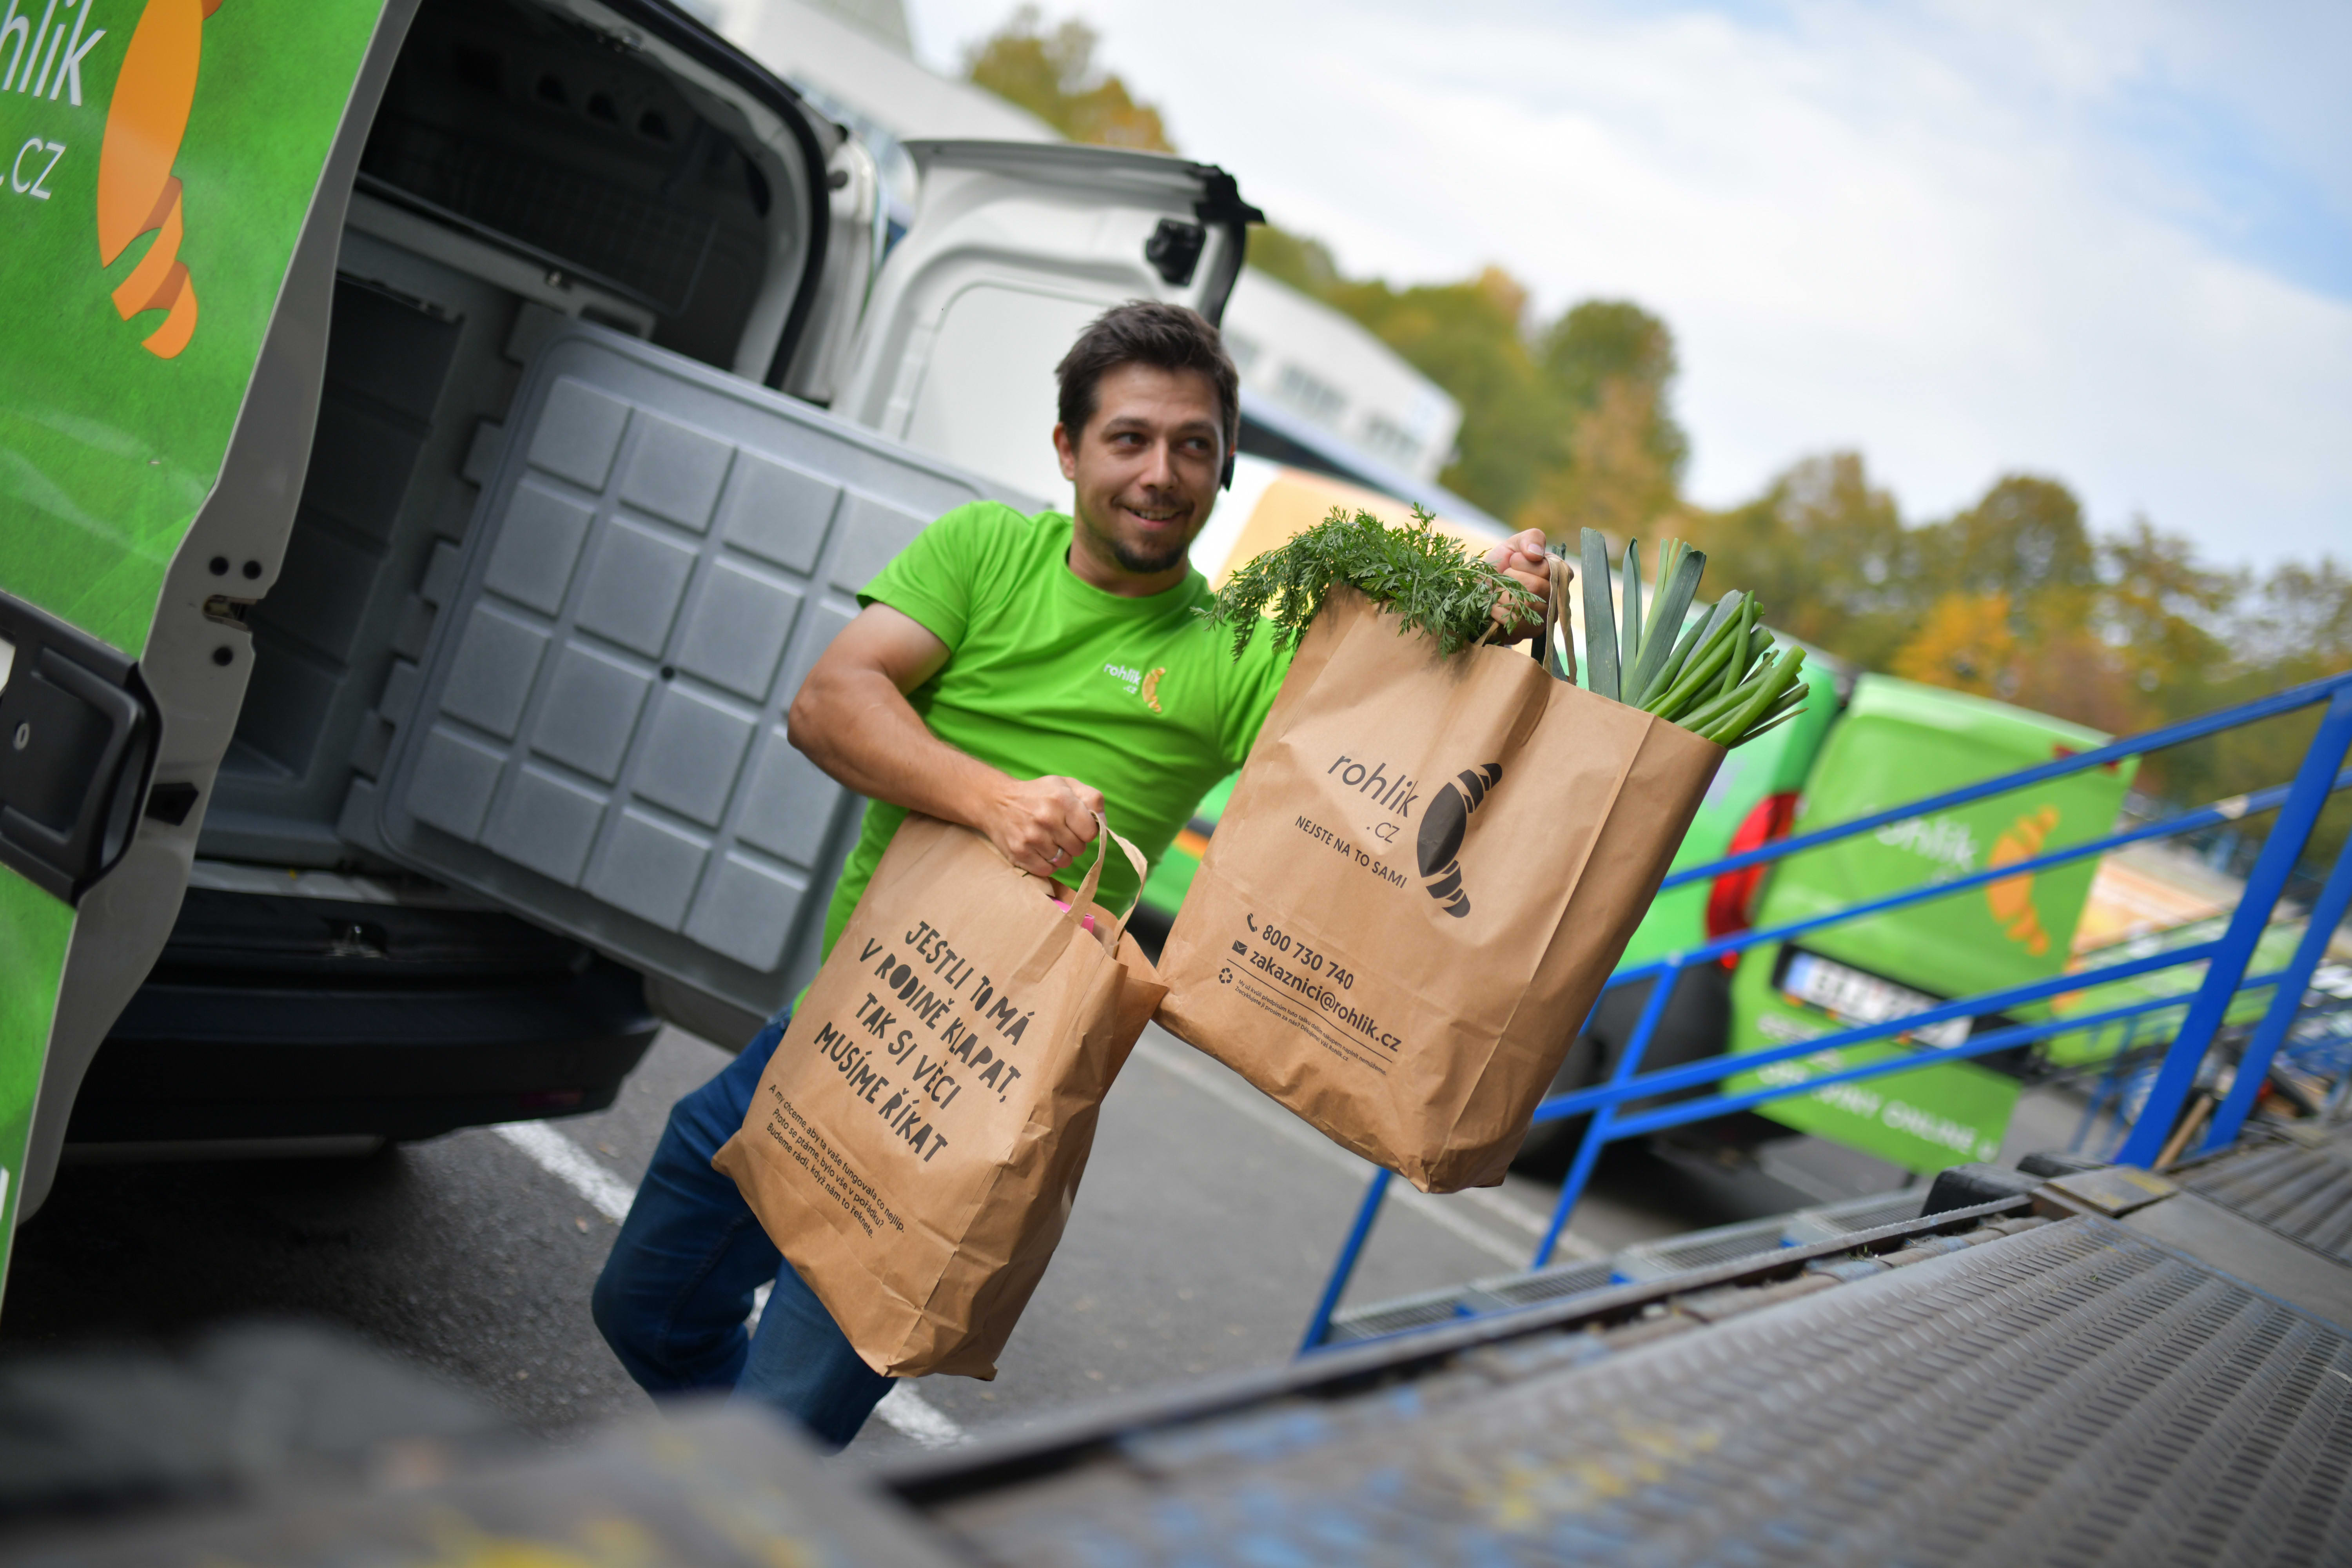 LONDON — Start-ups promising groceries delivered to your door in a matter of minutes are the hottest craze for venture capitalists right now. Invest